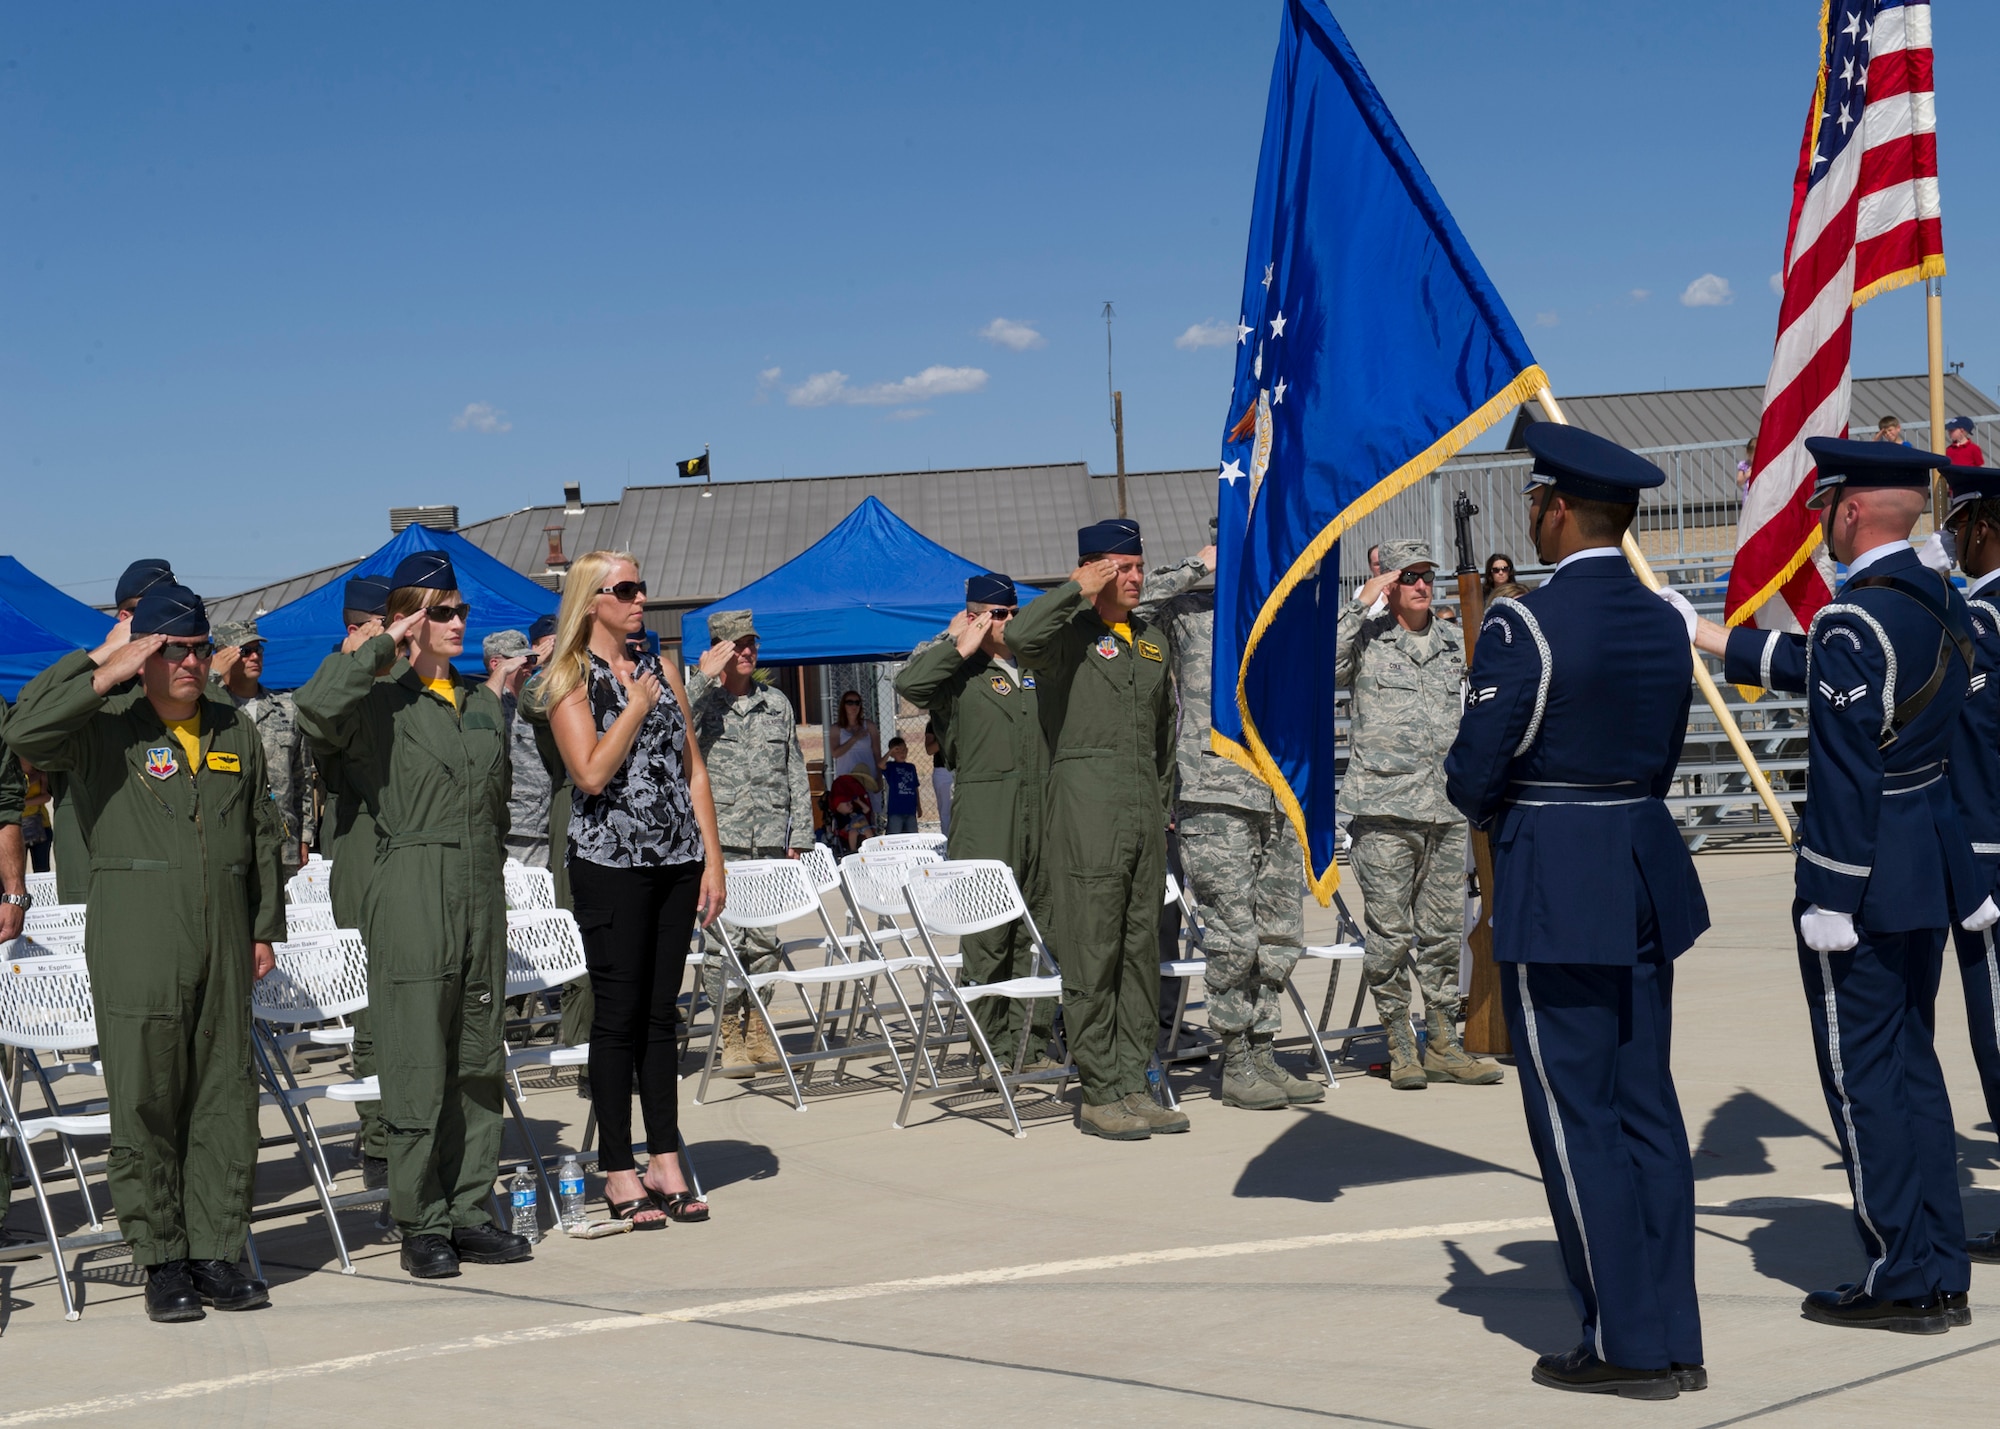 HOLLOMAN AIR FORCE BASE, N.M. -- The Holloman Air Force Base Honor Guard presents the colors, May 13, 2011, during the national anthem for the 8th Fighter Squadron inactivation ceremony. The 8th FS, known as the “Black Sheep”, was activated in January 1941 and its mission and aircraft have changed several times to support the needs of the Air Force. The inactivation means that the Airmen will be relocated to different units on Holloman. (U.S. Air Force photo by Airman 1st Class Eileen Payne/Released)